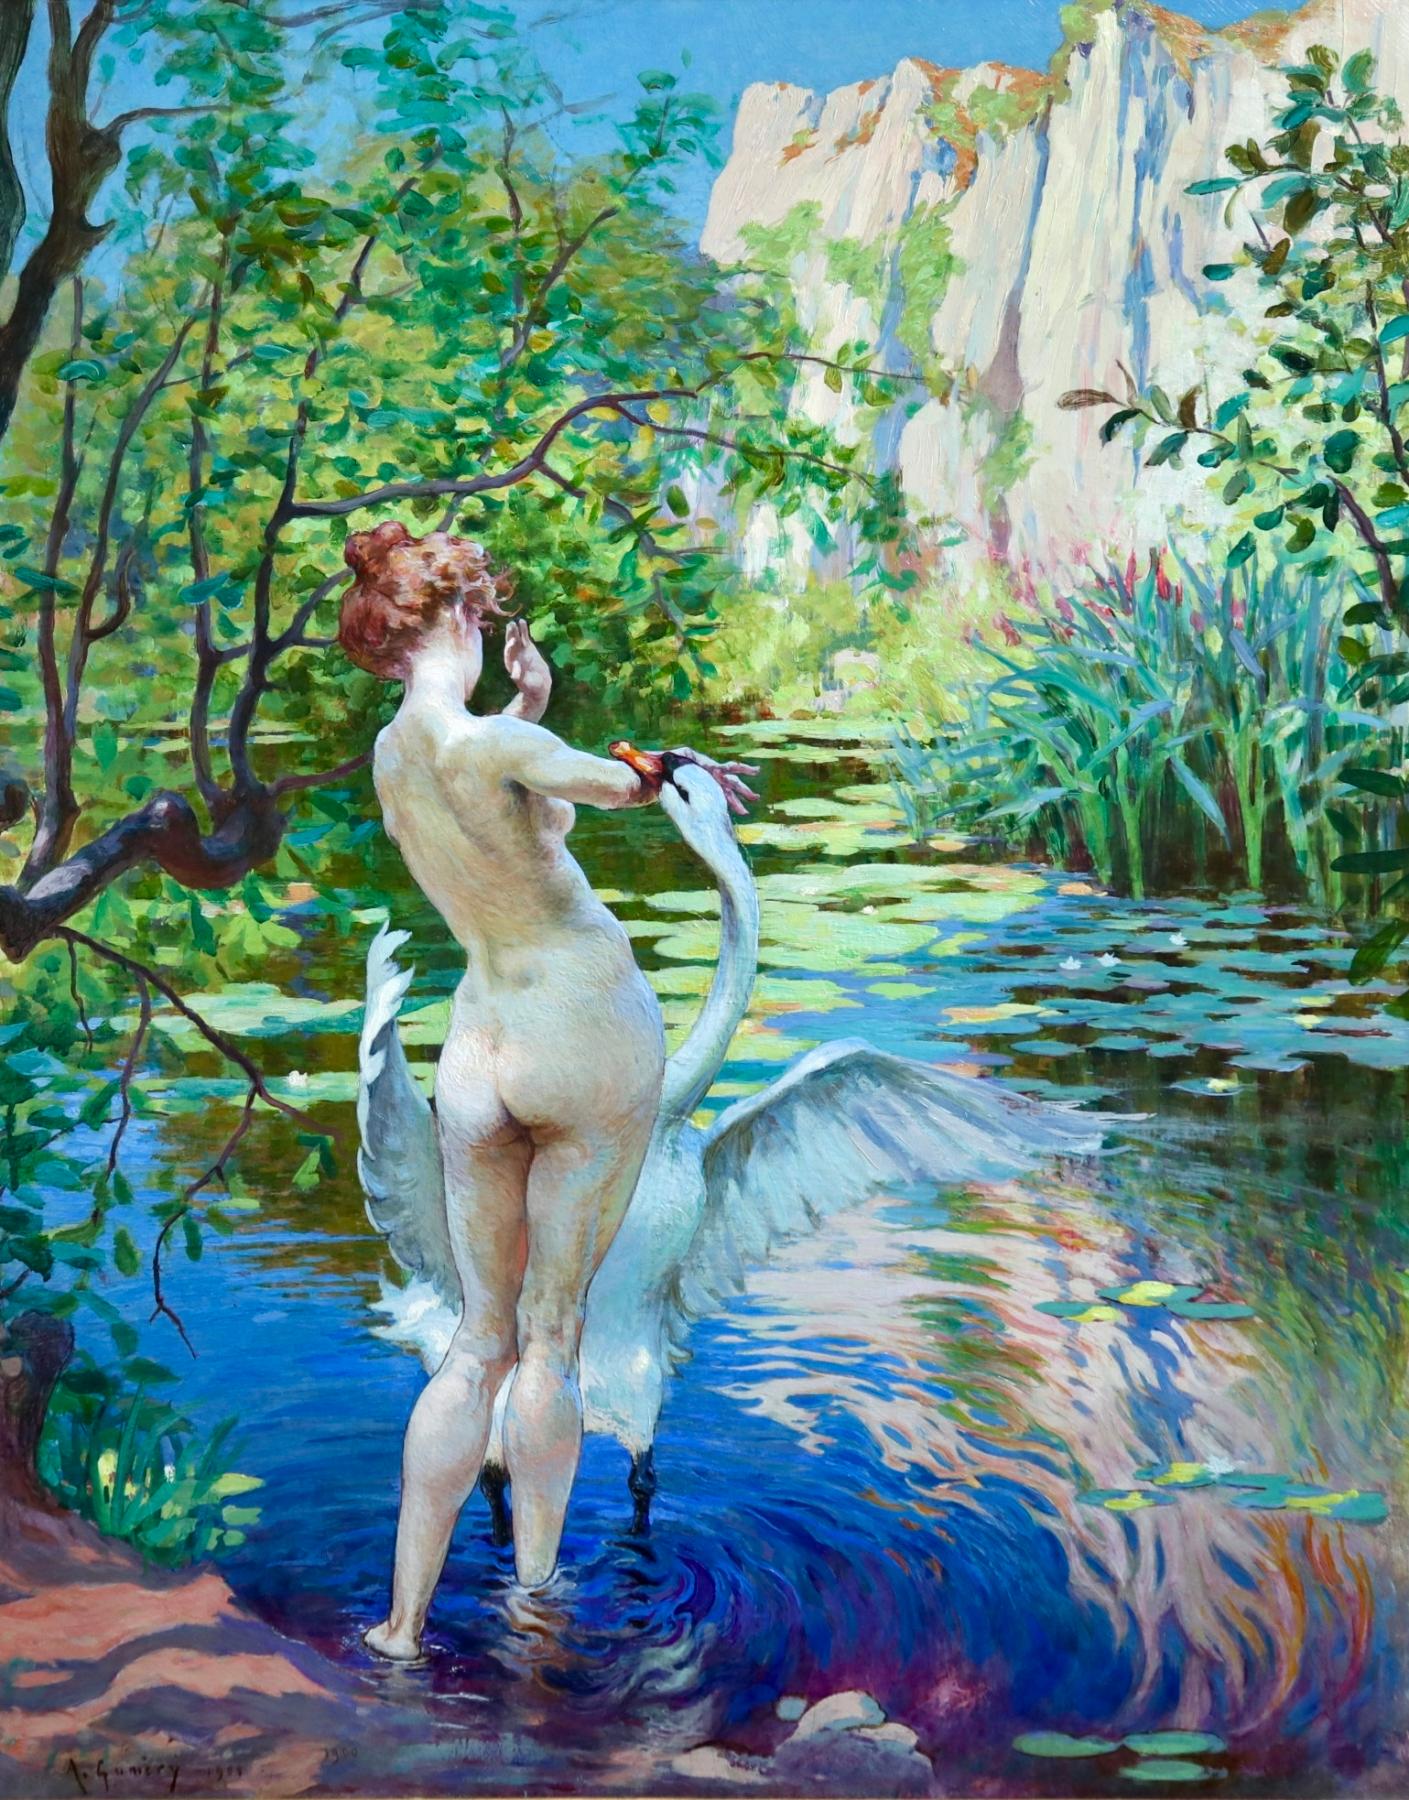 A stunning oil on canvas by French orientalist painter Adolphe Ernest Gumery depicting the story of Leda and the Swan. The subject comes from a story in Greek mythology in which the god Zeus, in the form of a swan, seduces Leda. According to later